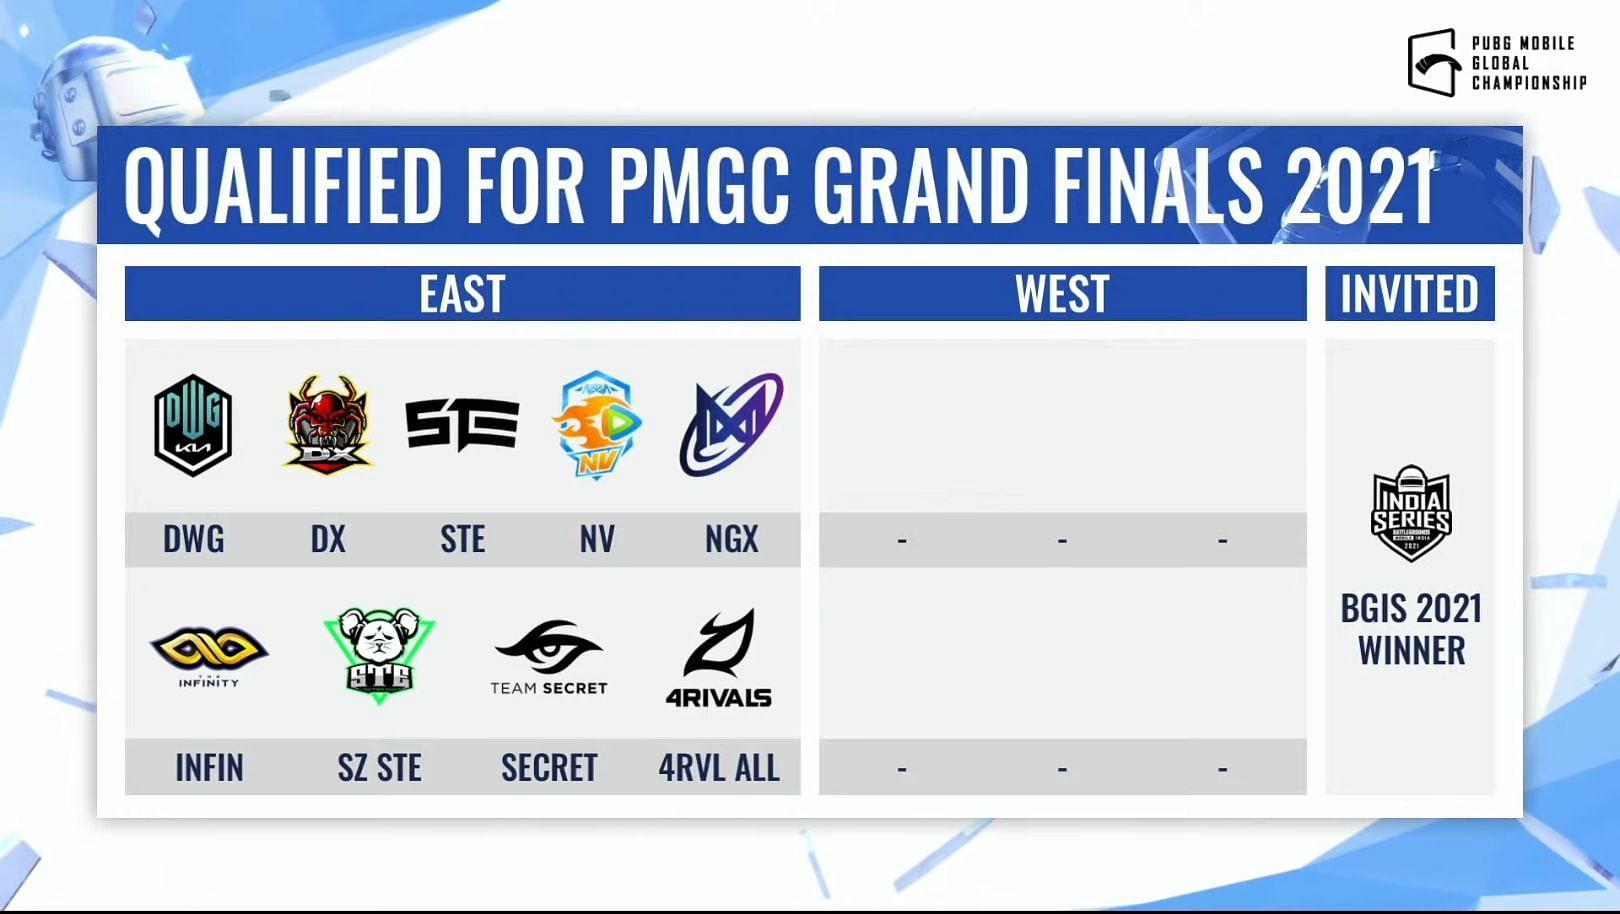 Top 9 teams have qualified for PMGC Grand Finals (Image via PUBG Mobile)